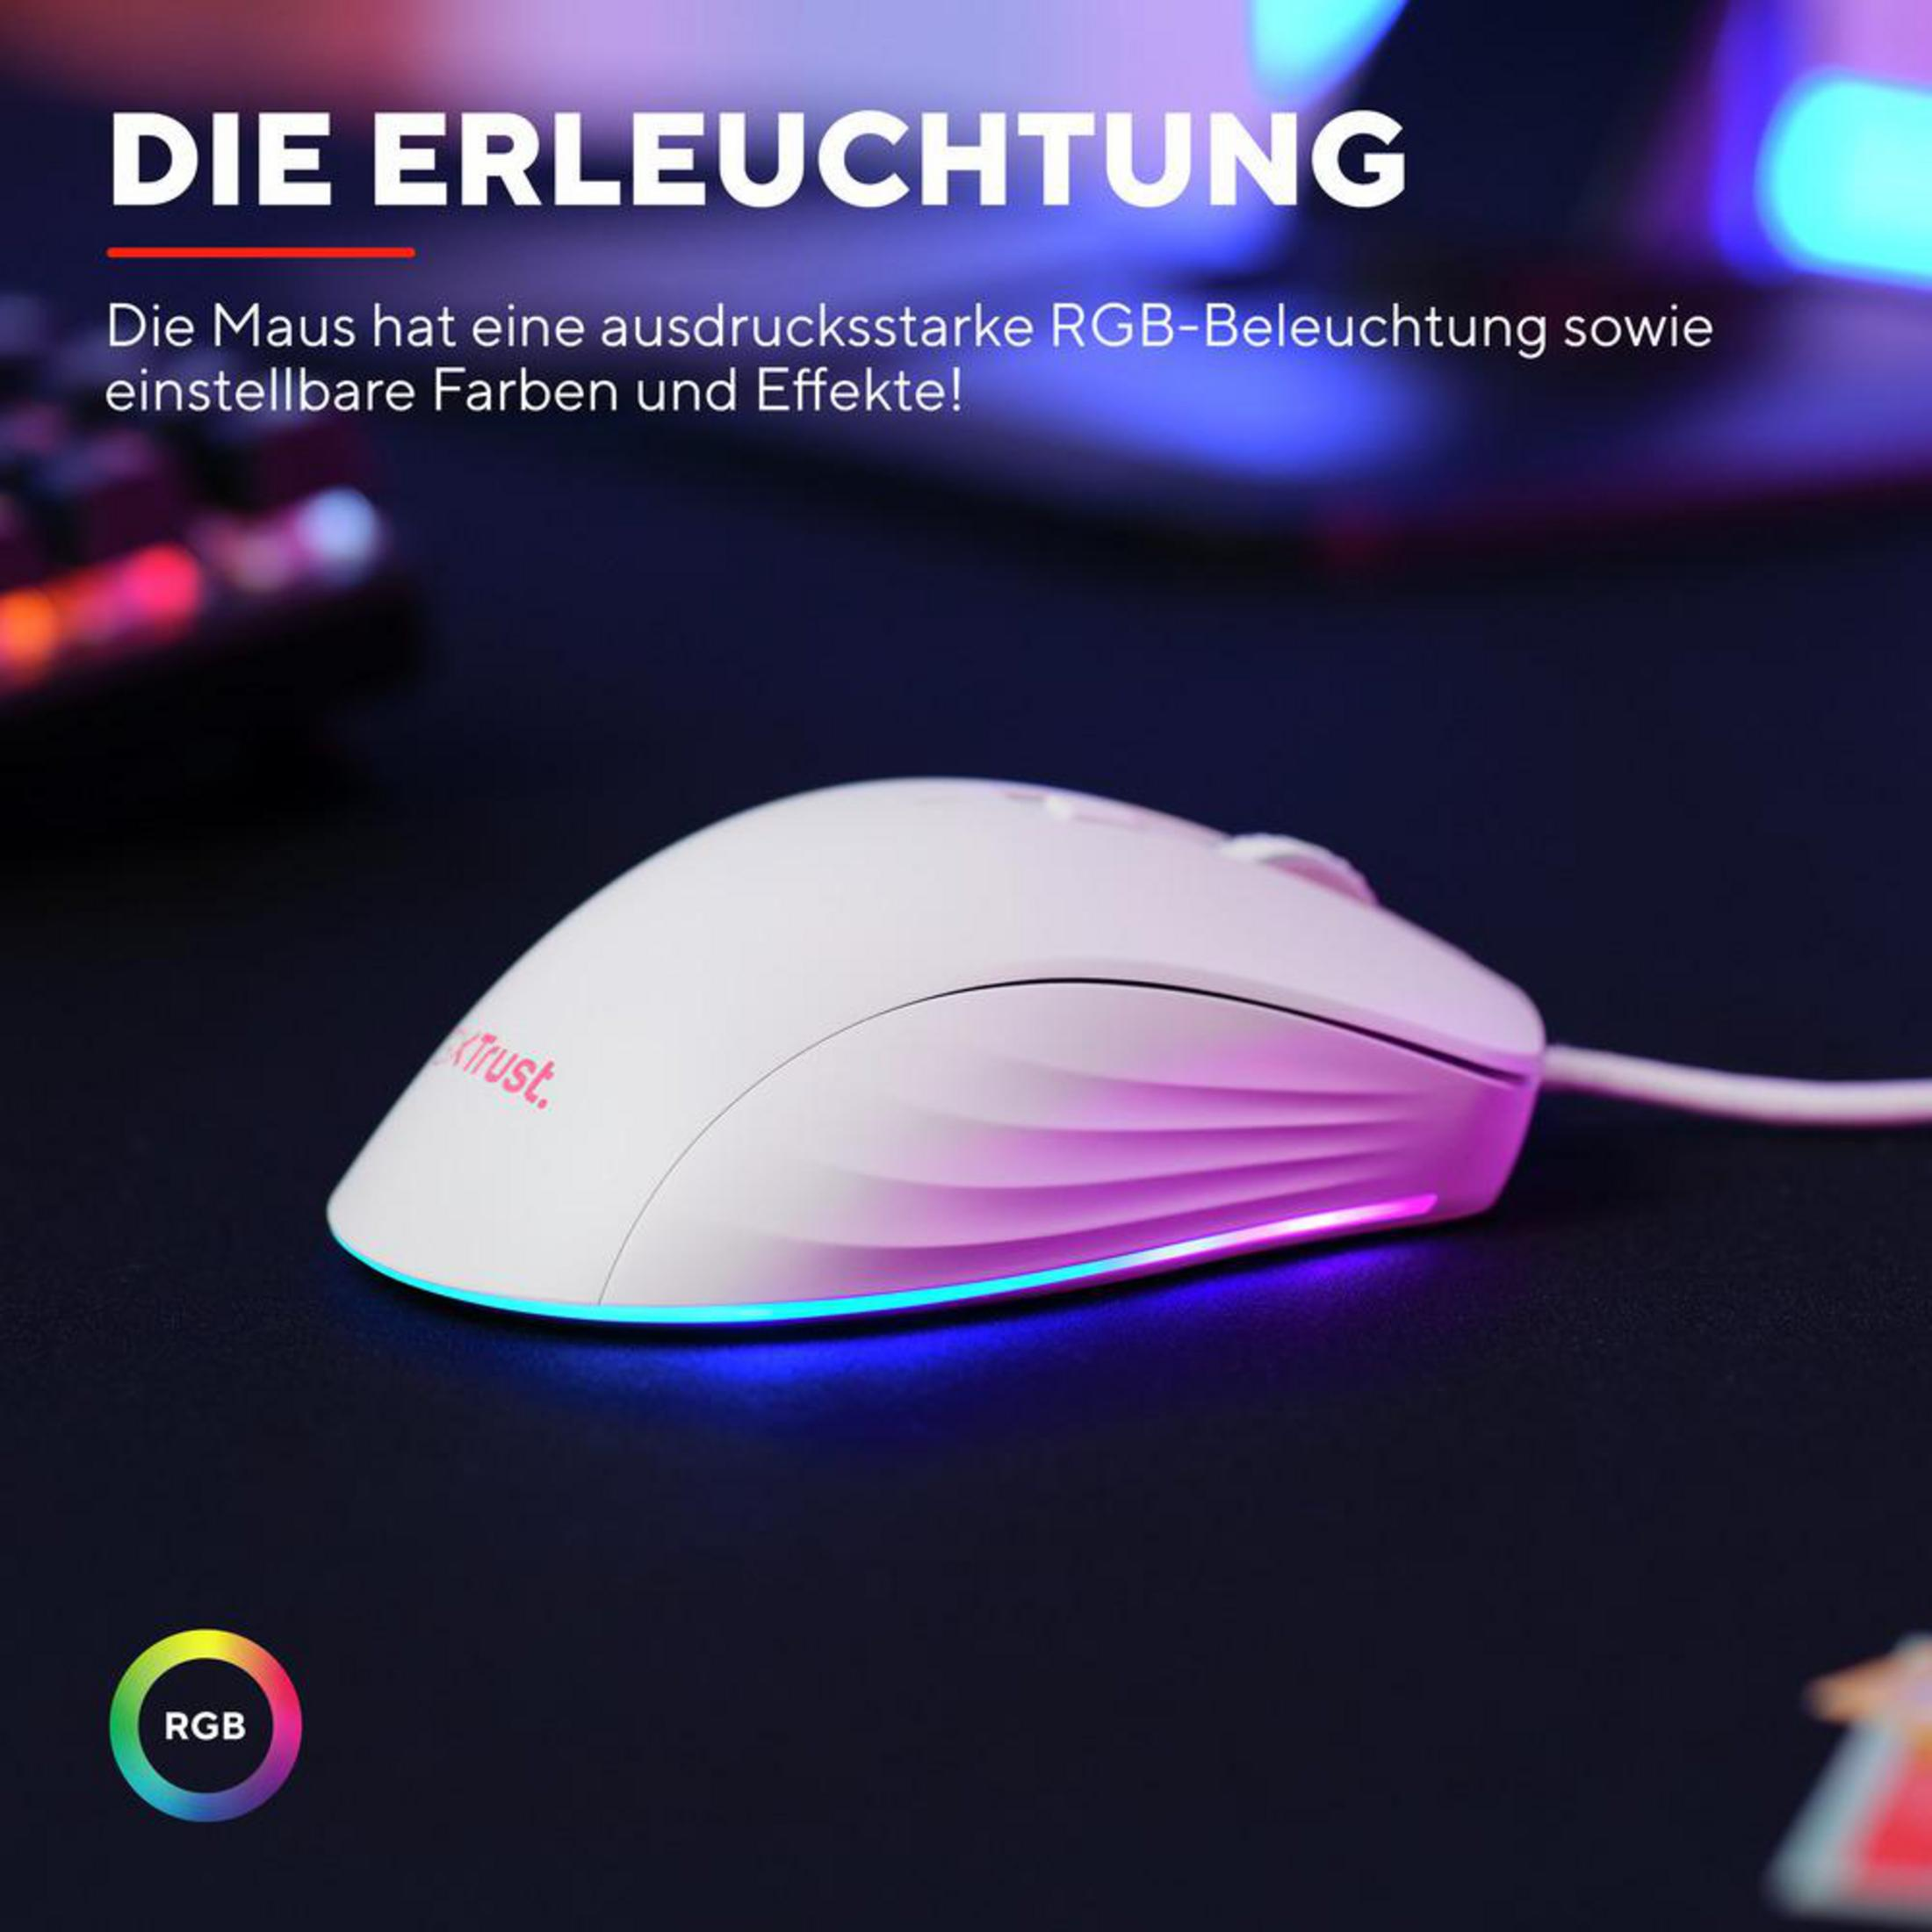 YBAR+ Gaming GXT924W GAMING WHITE Maus, MOUSE TRUST Weiß 24891